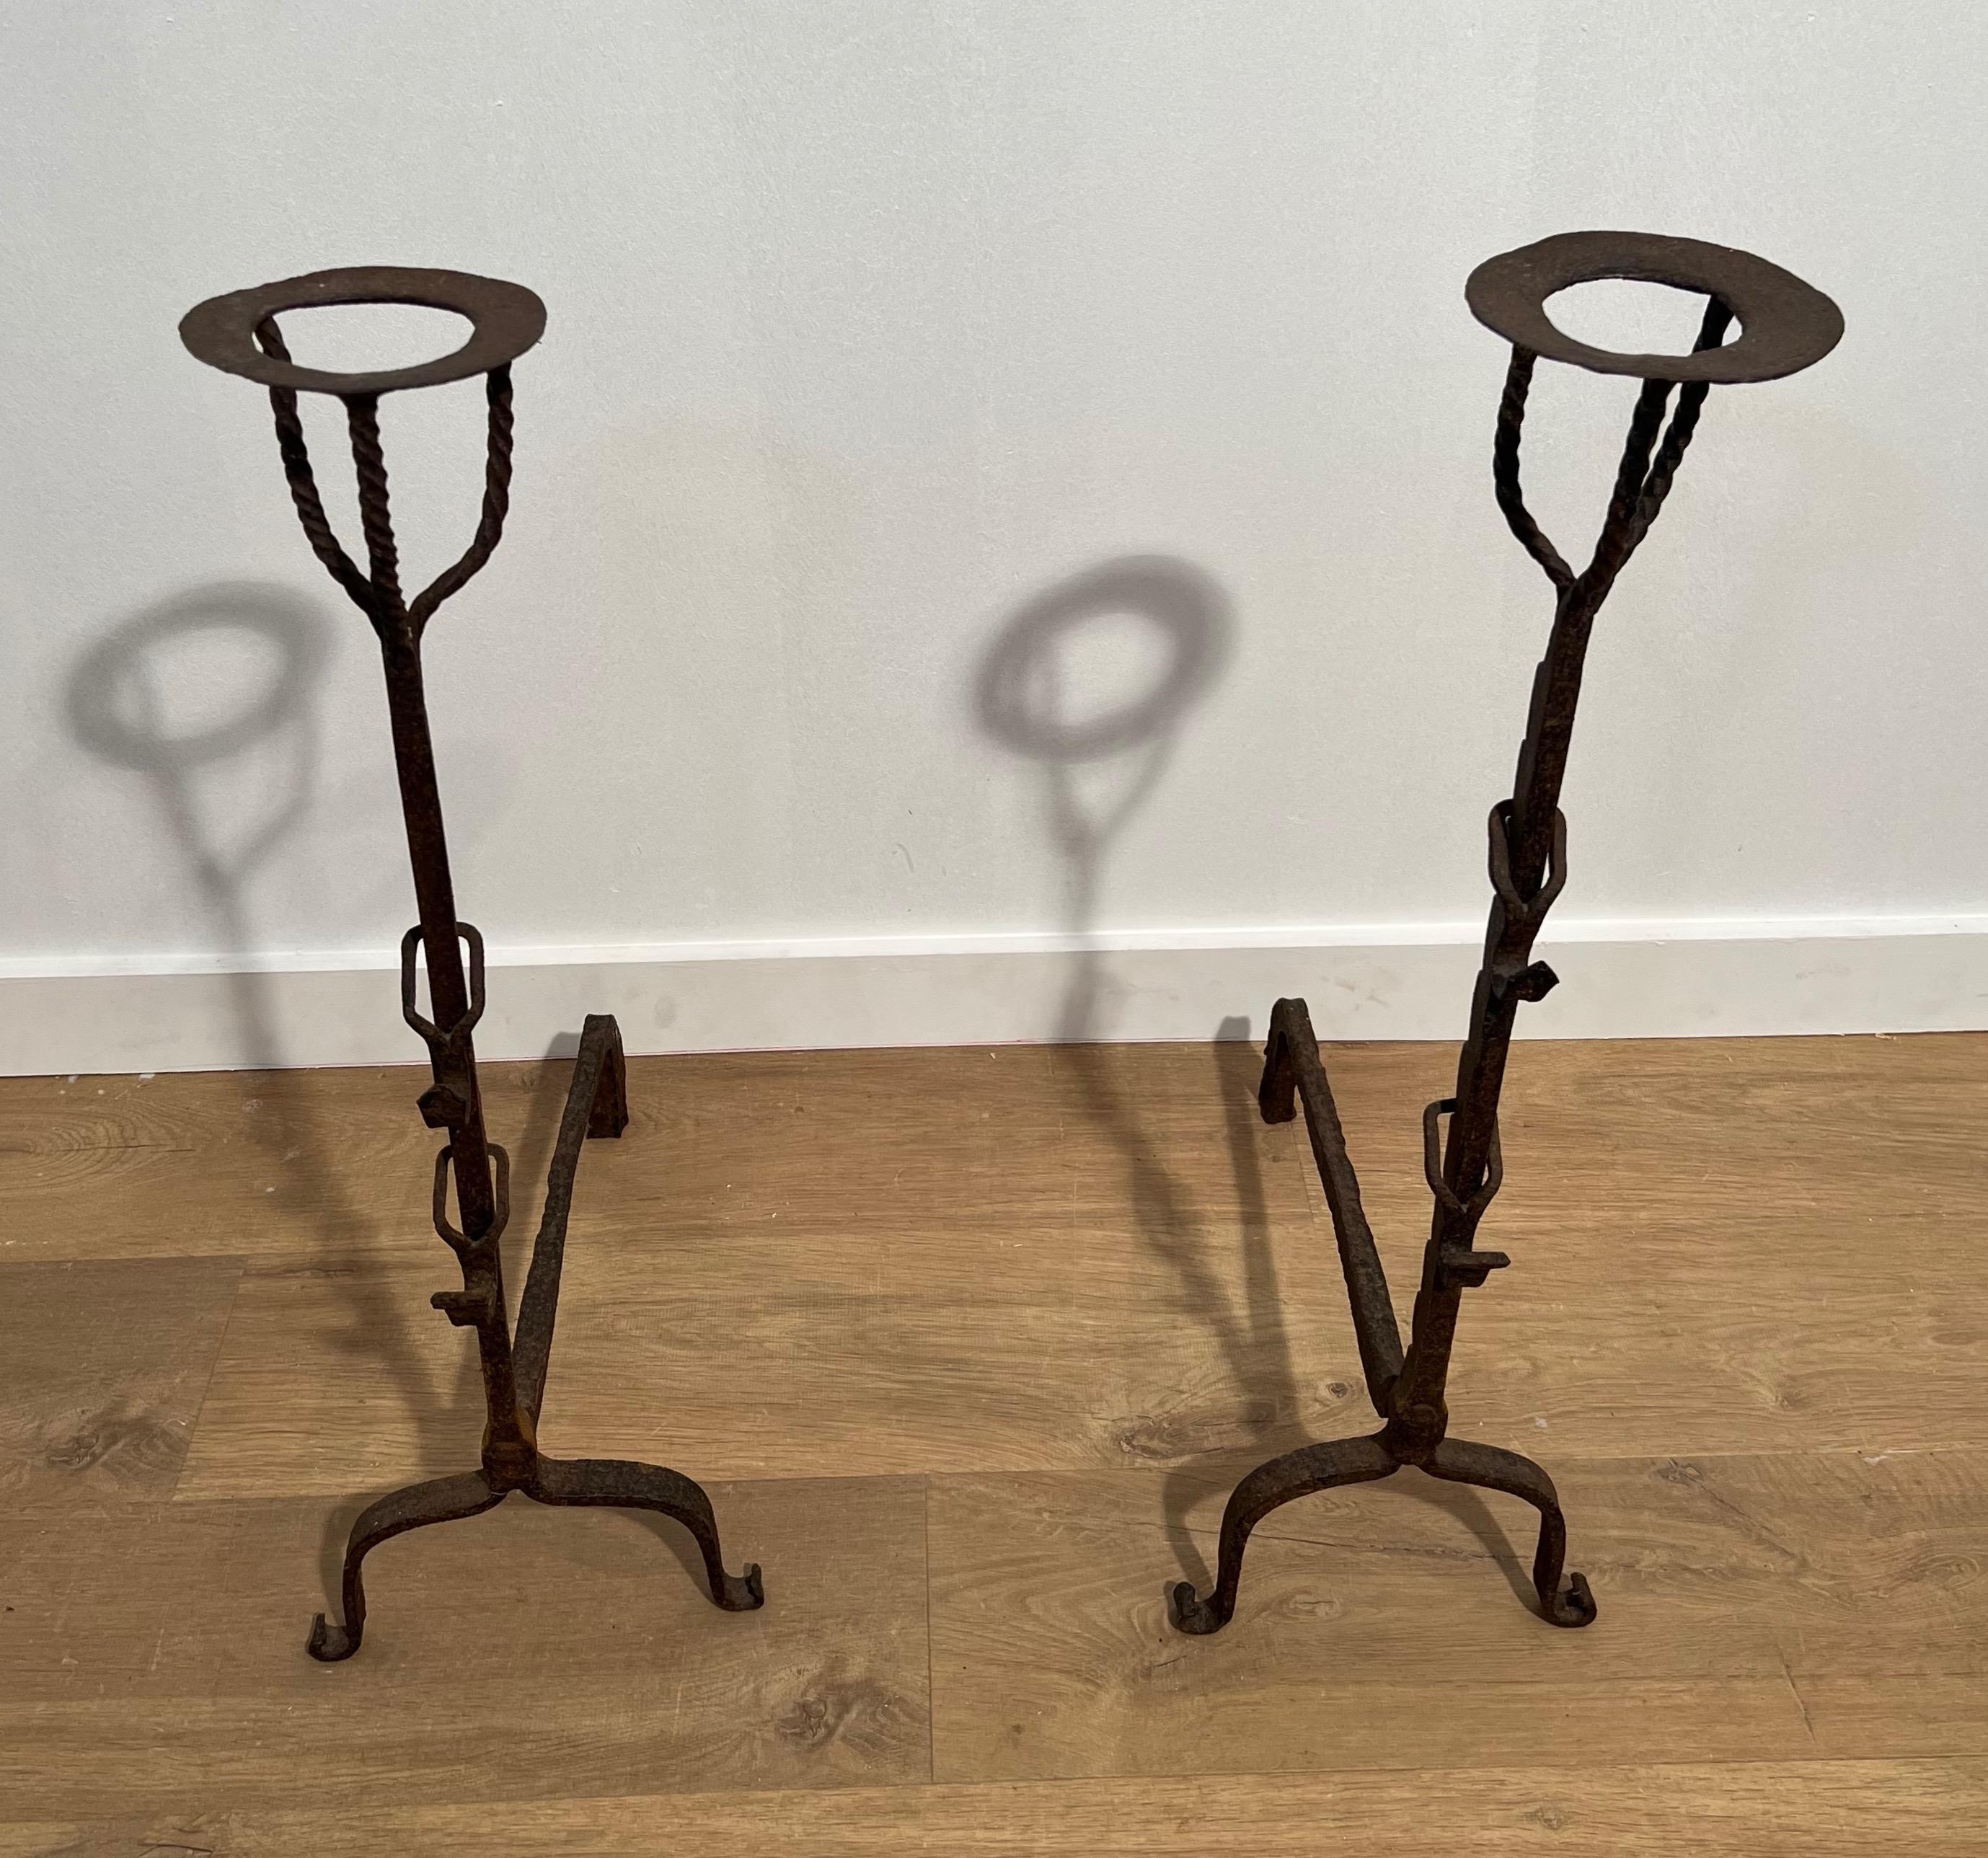 This very nice and rare pair of landiers is made of wrought iron. This is a very old and fine work. The iron is twisted on top and there is a 